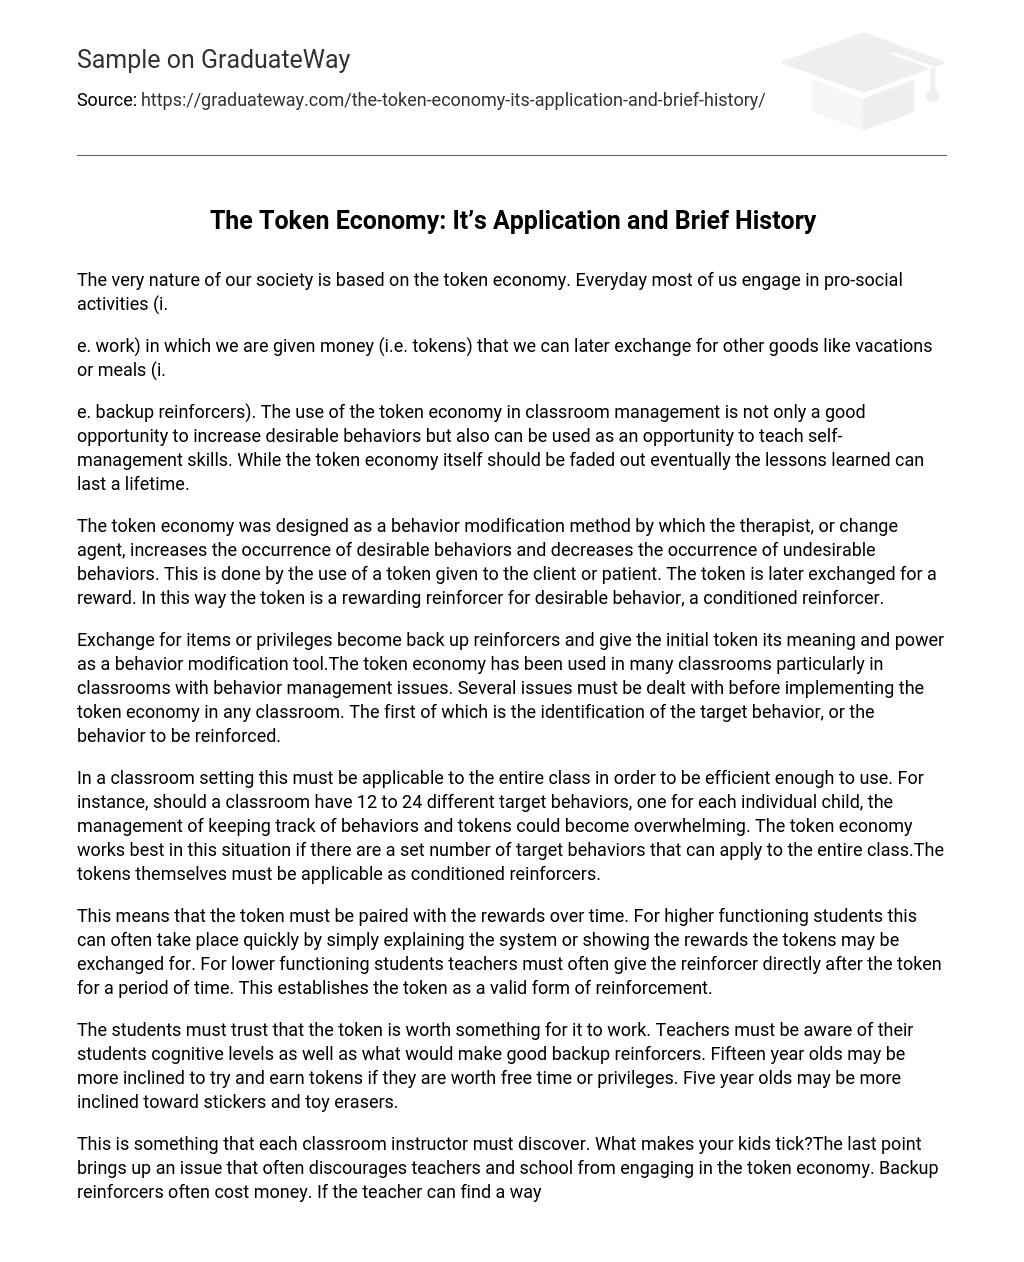 The Token Economy: It’s Application and Brief History